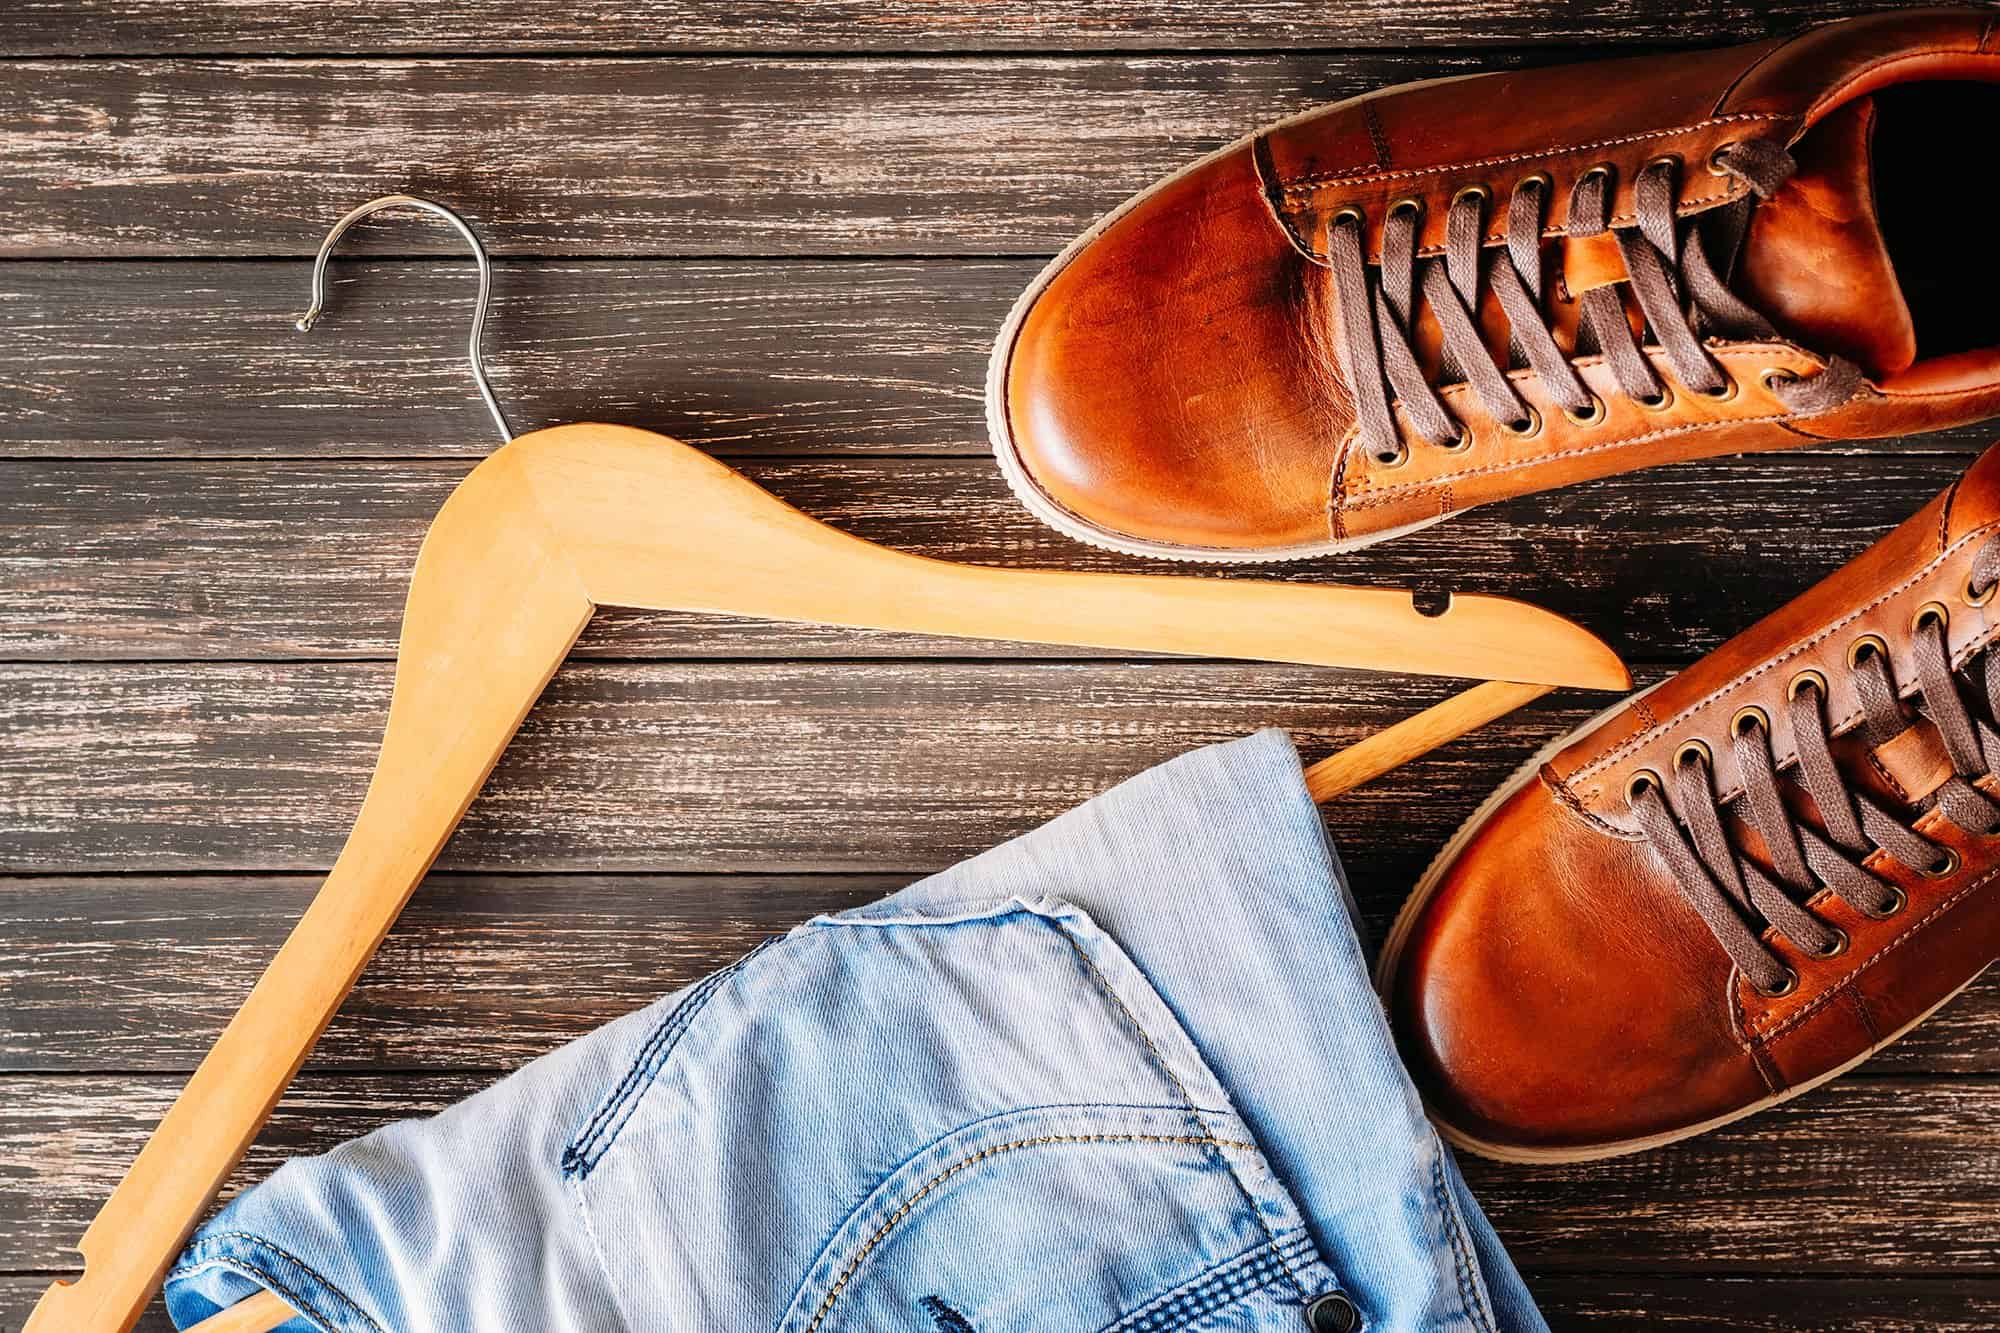 Choosing Best Shoes to Pair With Blue Jeans